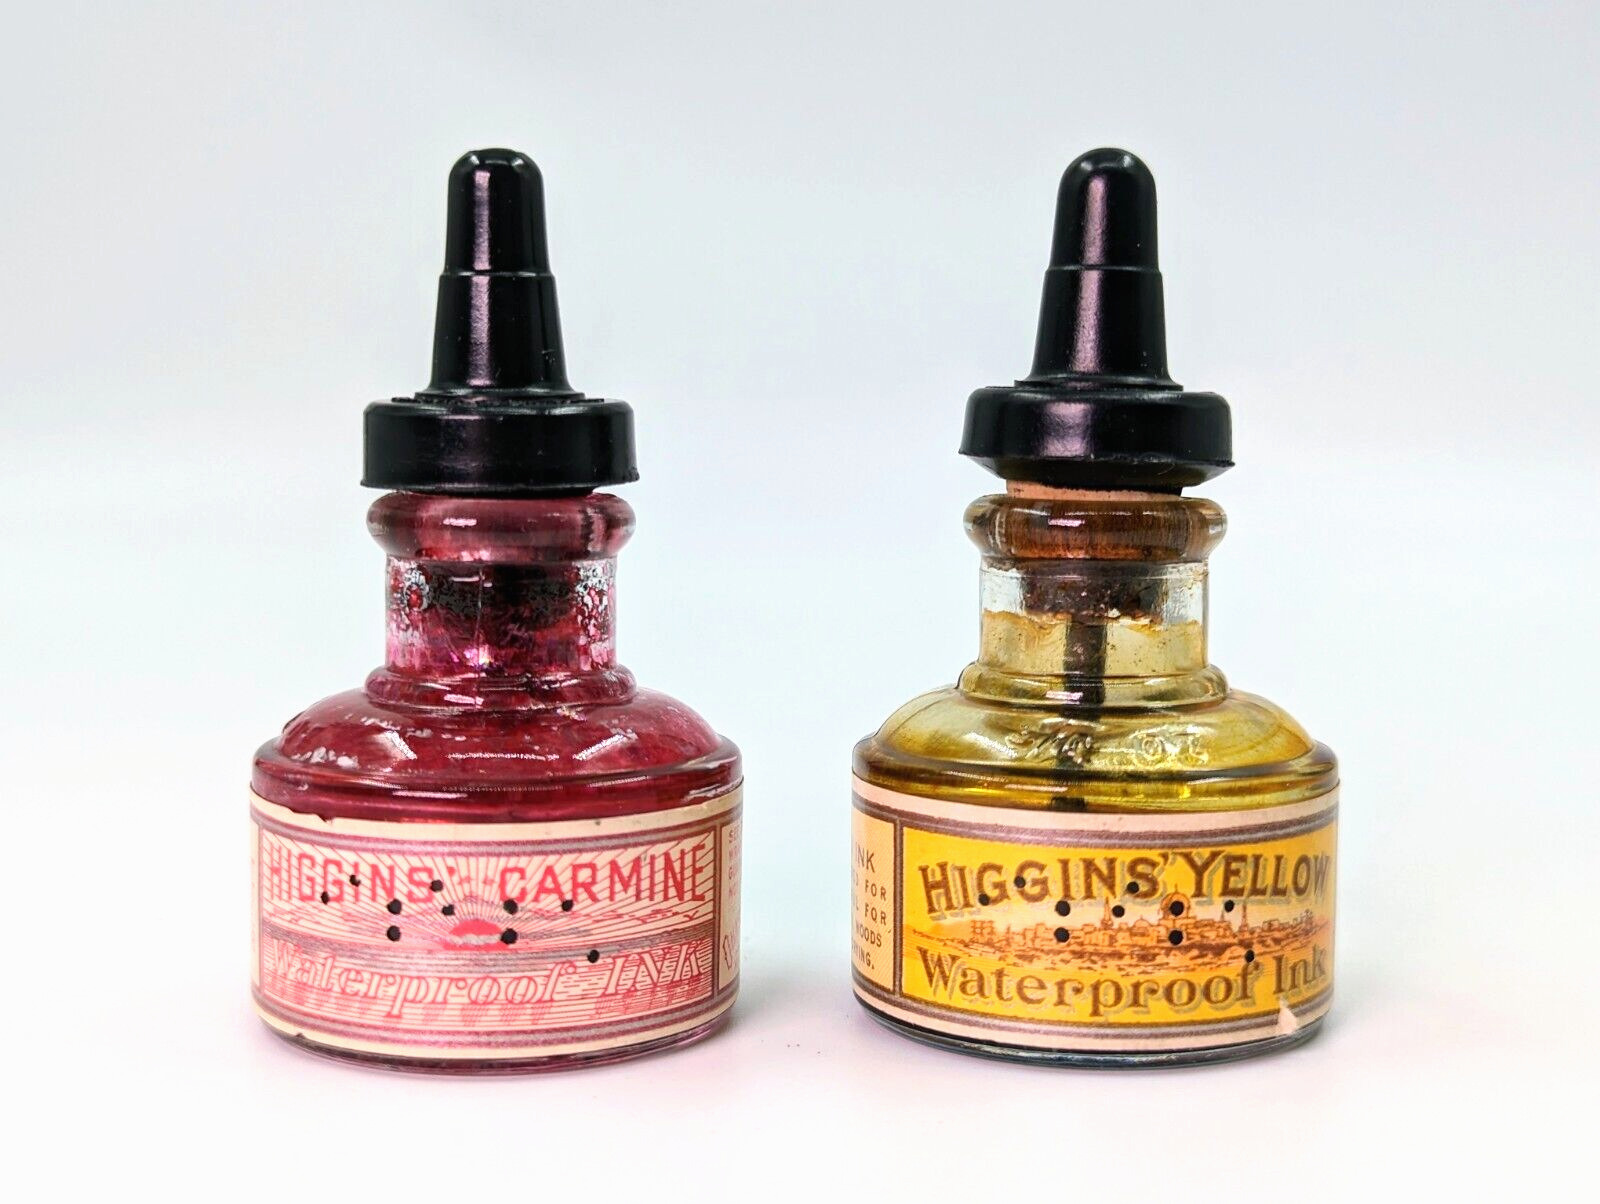 2 Early 1900’s Higgins Ink ¾ oz. Bottles w/Original Labels Carmine Red & Yellow